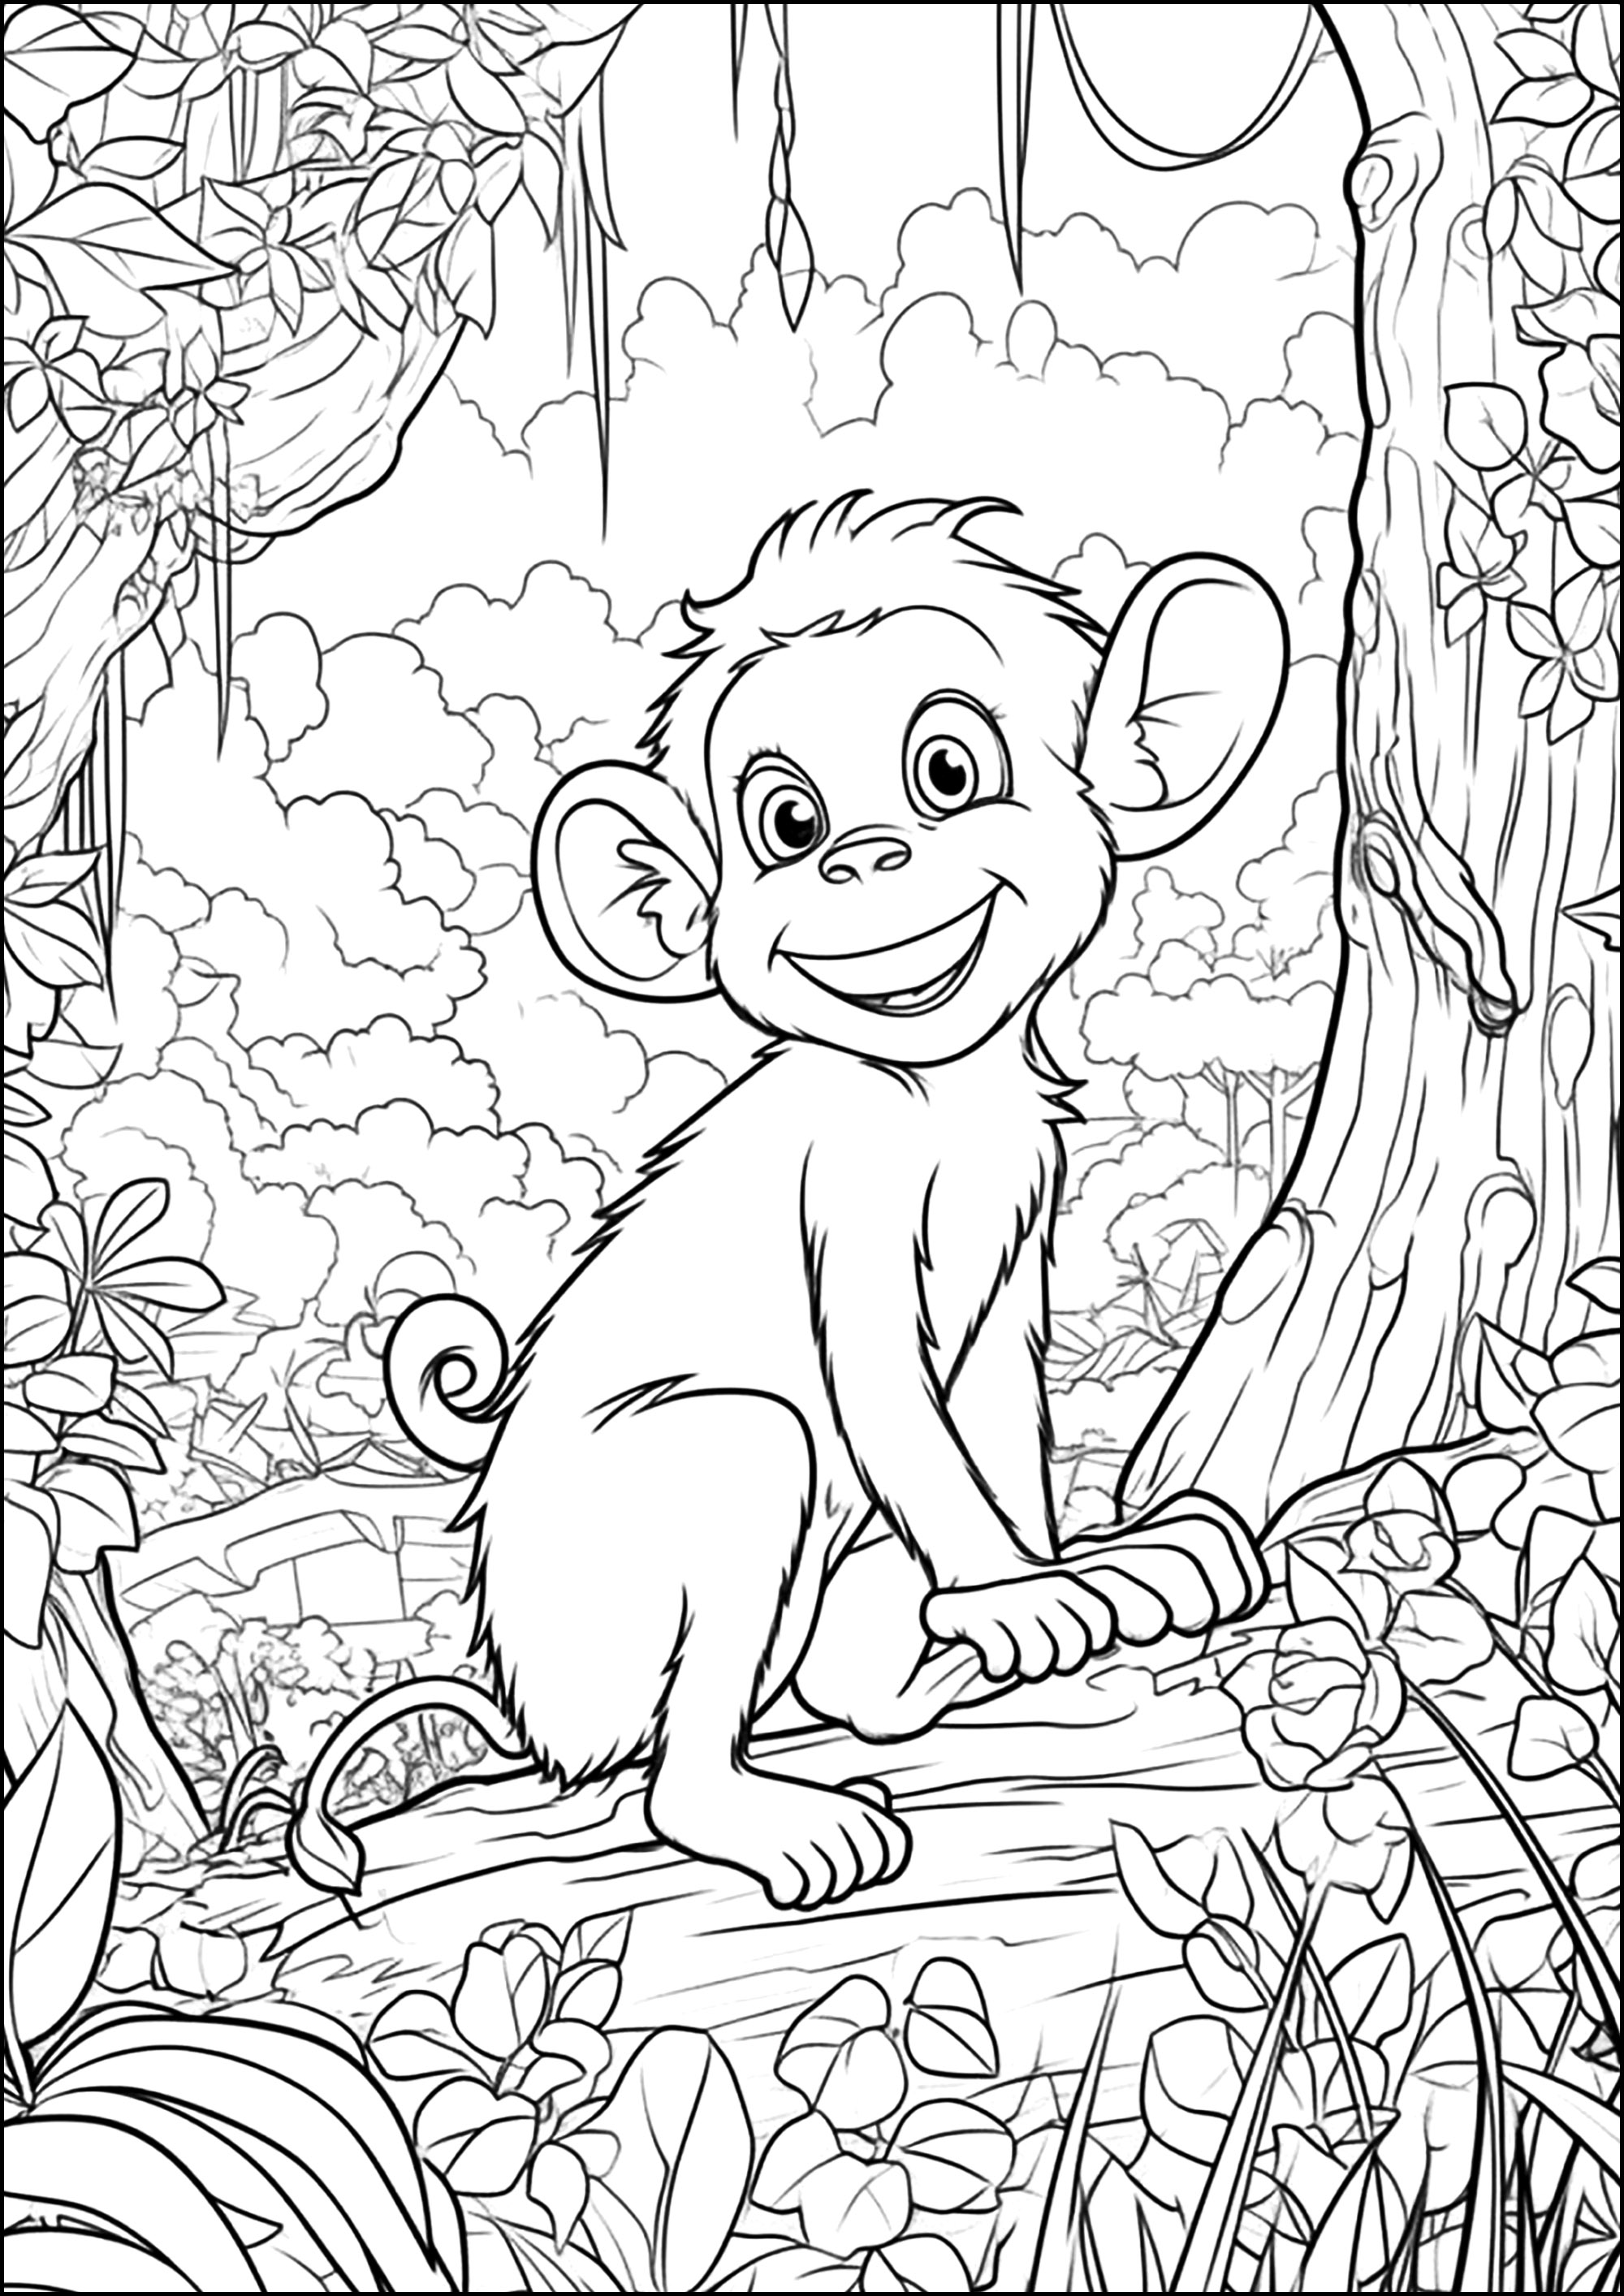 Três macacos engraçados na selva - Macacos - Coloring Pages for Adults